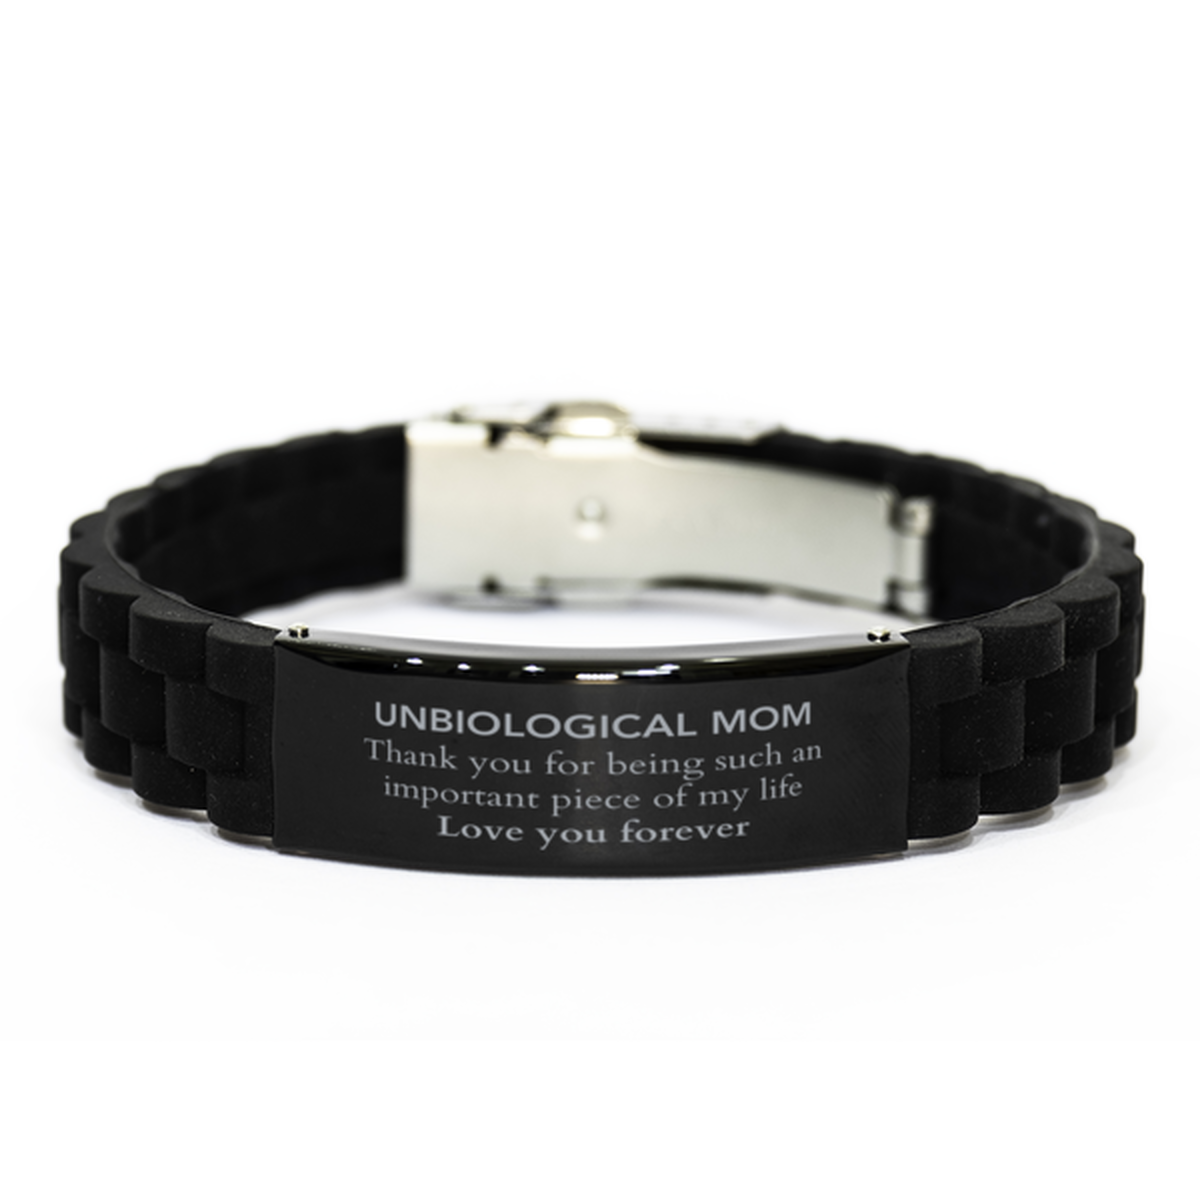 Appropriate Unbiological Mom Black Glidelock Clasp Bracelet Epic Birthday Gifts for Unbiological Mom Thank you for being such an important piece of my life Unbiological Mom Christmas Mothers Fathers Day